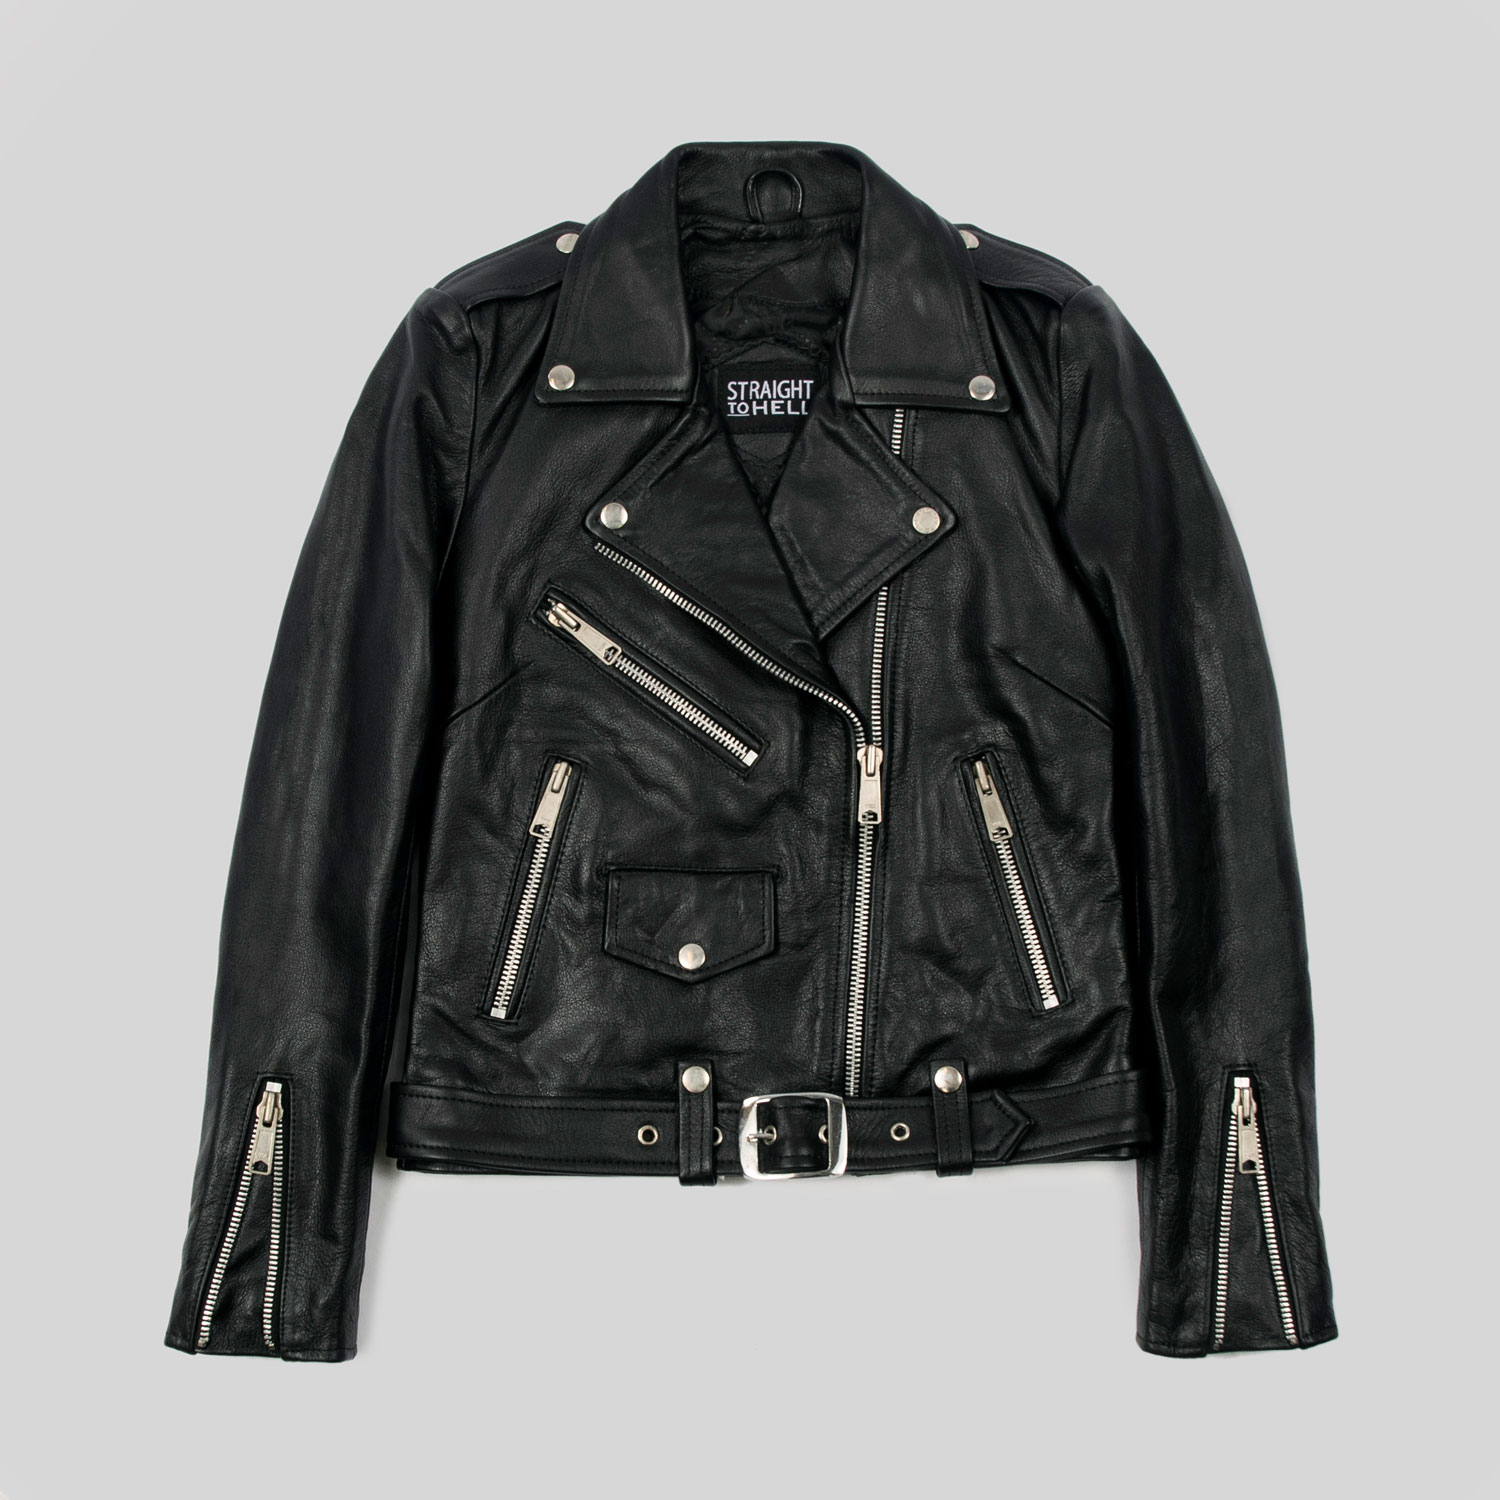 Commando - Black and Nickel Jacket Leather Apparel | Straight - To Lining Black - Hell